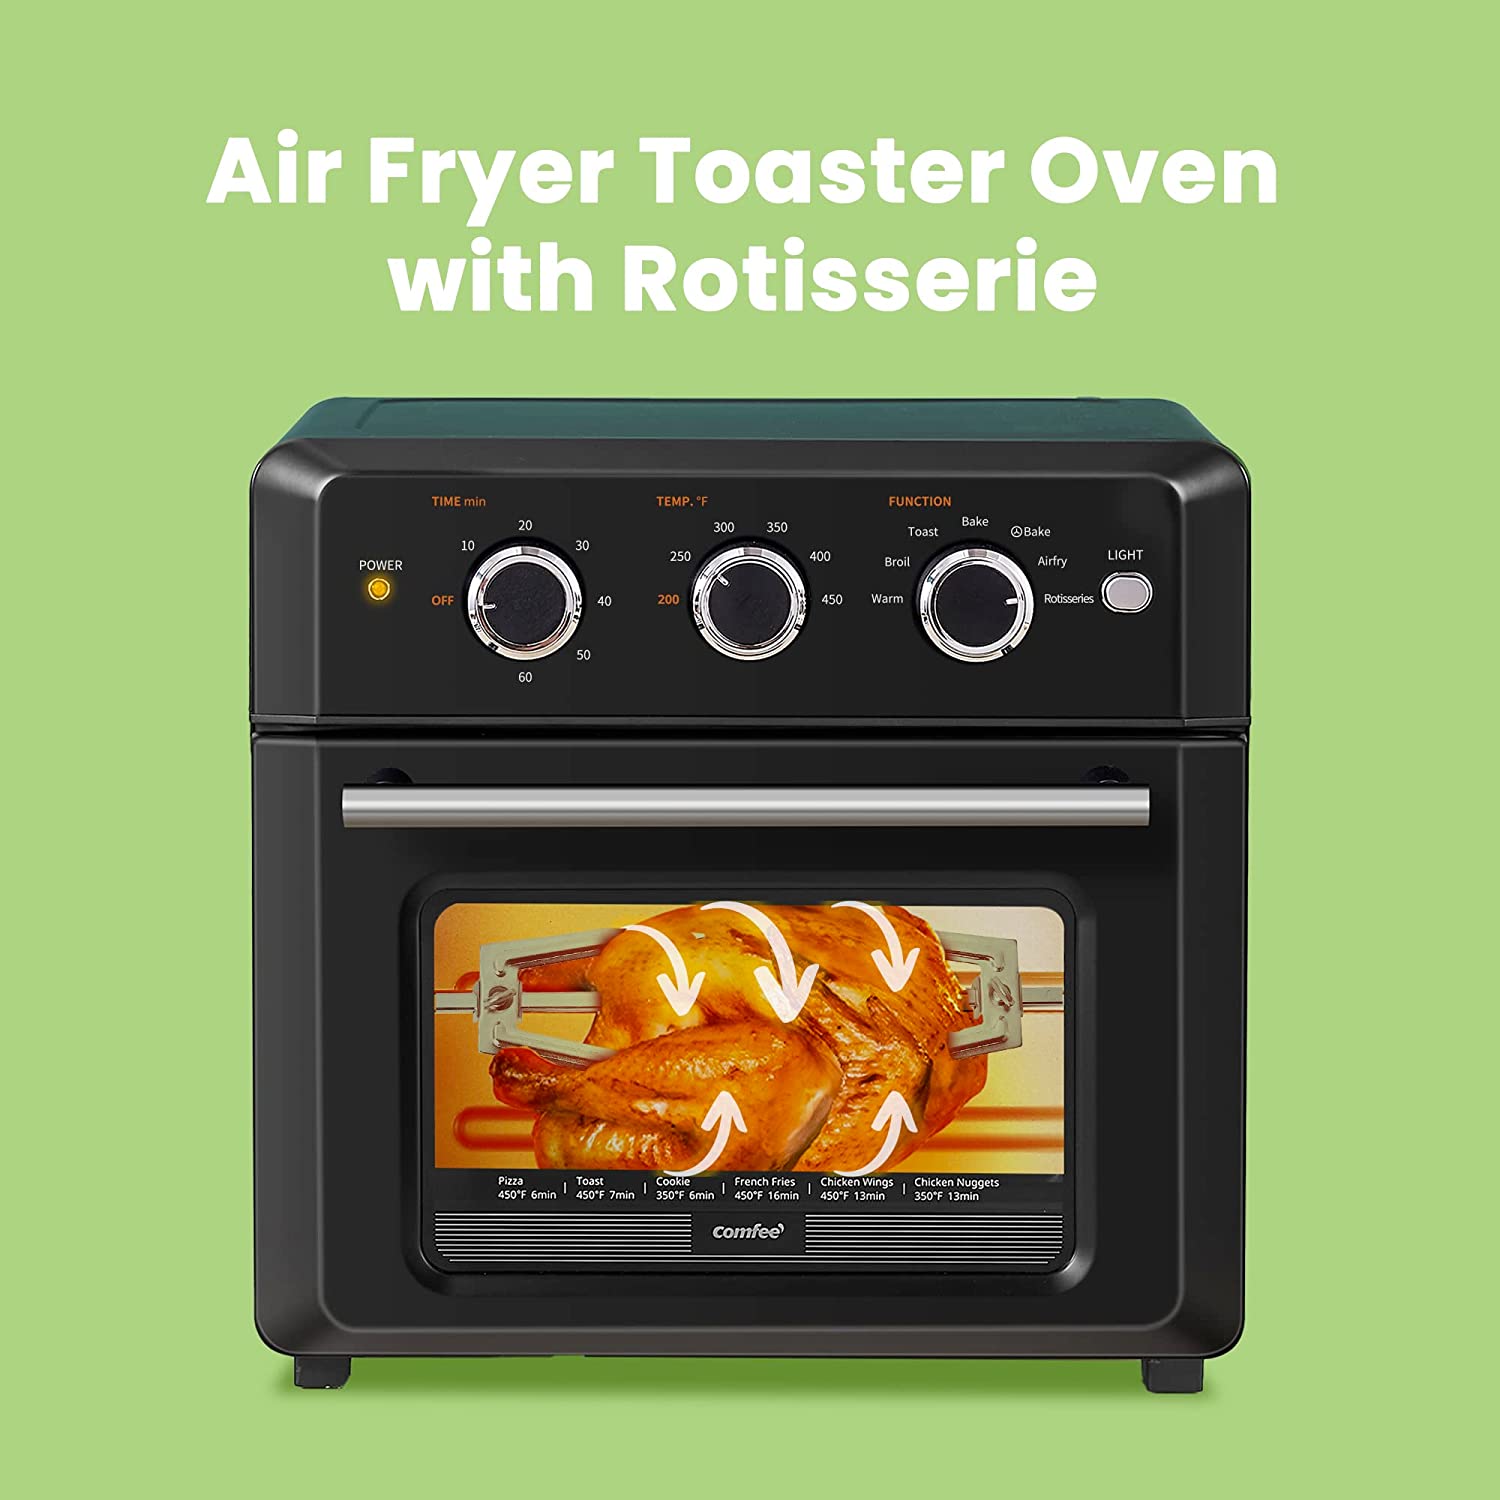 https://bigbigmart.com/wp-content/uploads/2023/06/COMFEE-Retro-Air-Fry-Toaster-Oven-7-in-1-1500W-19QT-Capacity-6-Slice-Air-Fry-Rotisseries-Warm-Broil-Toast-Bake-Convection-Bake-Black-Perfect-for-Countertop3.jpg